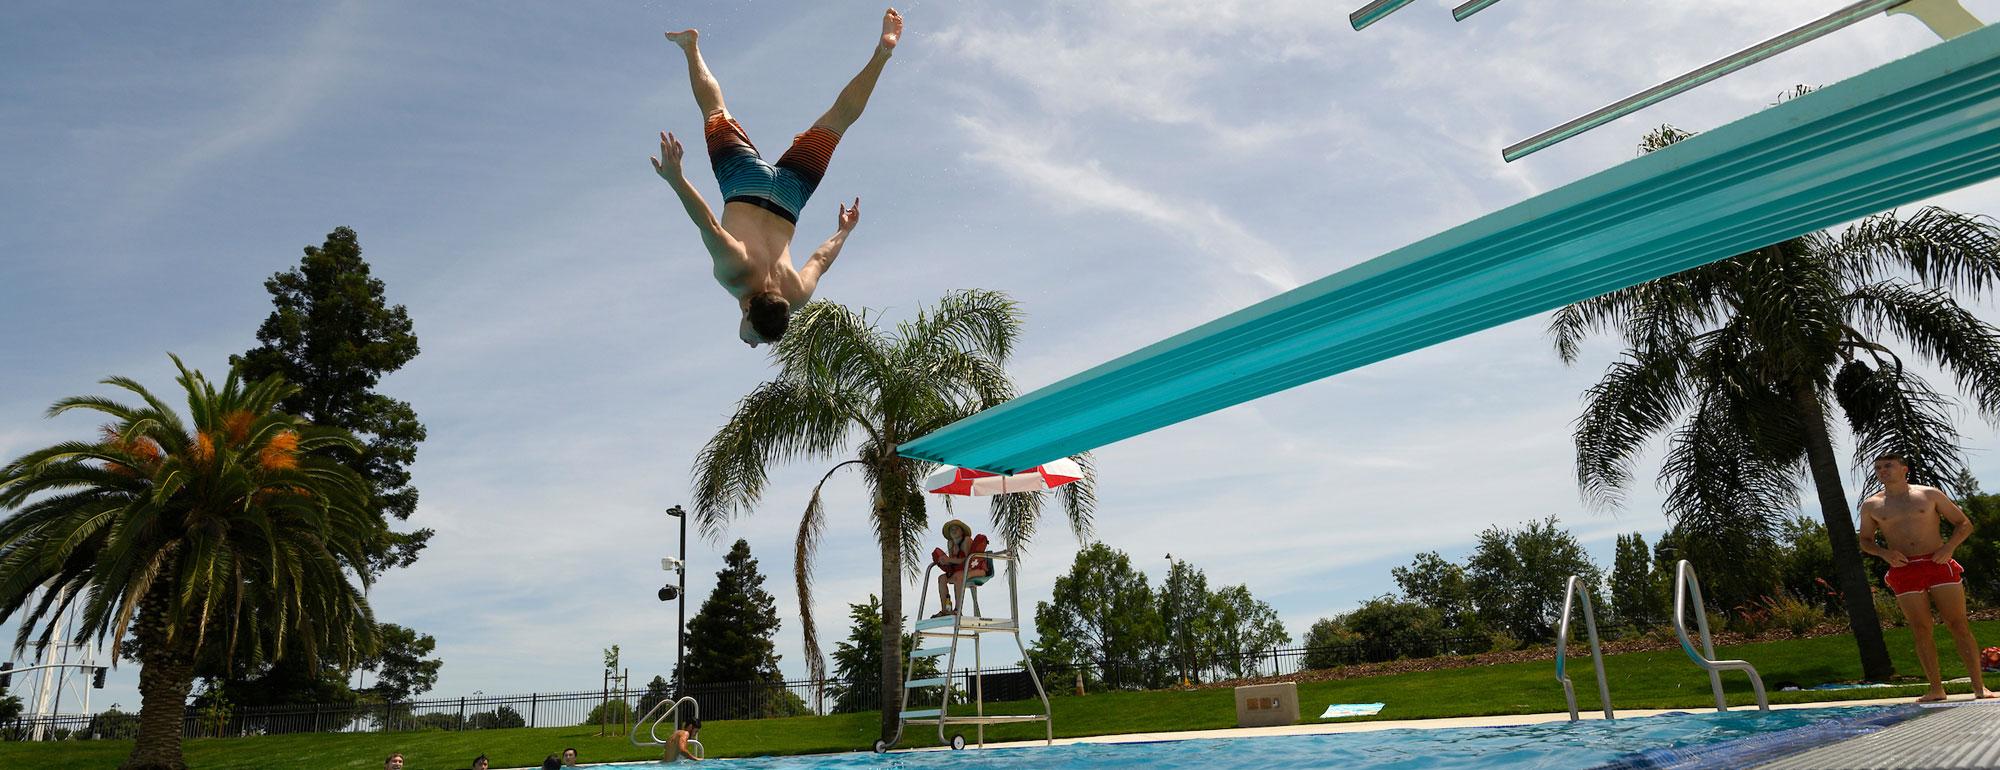 A student doing an acrobatic jump of of the diving board at the UC Davis Recreation Pool